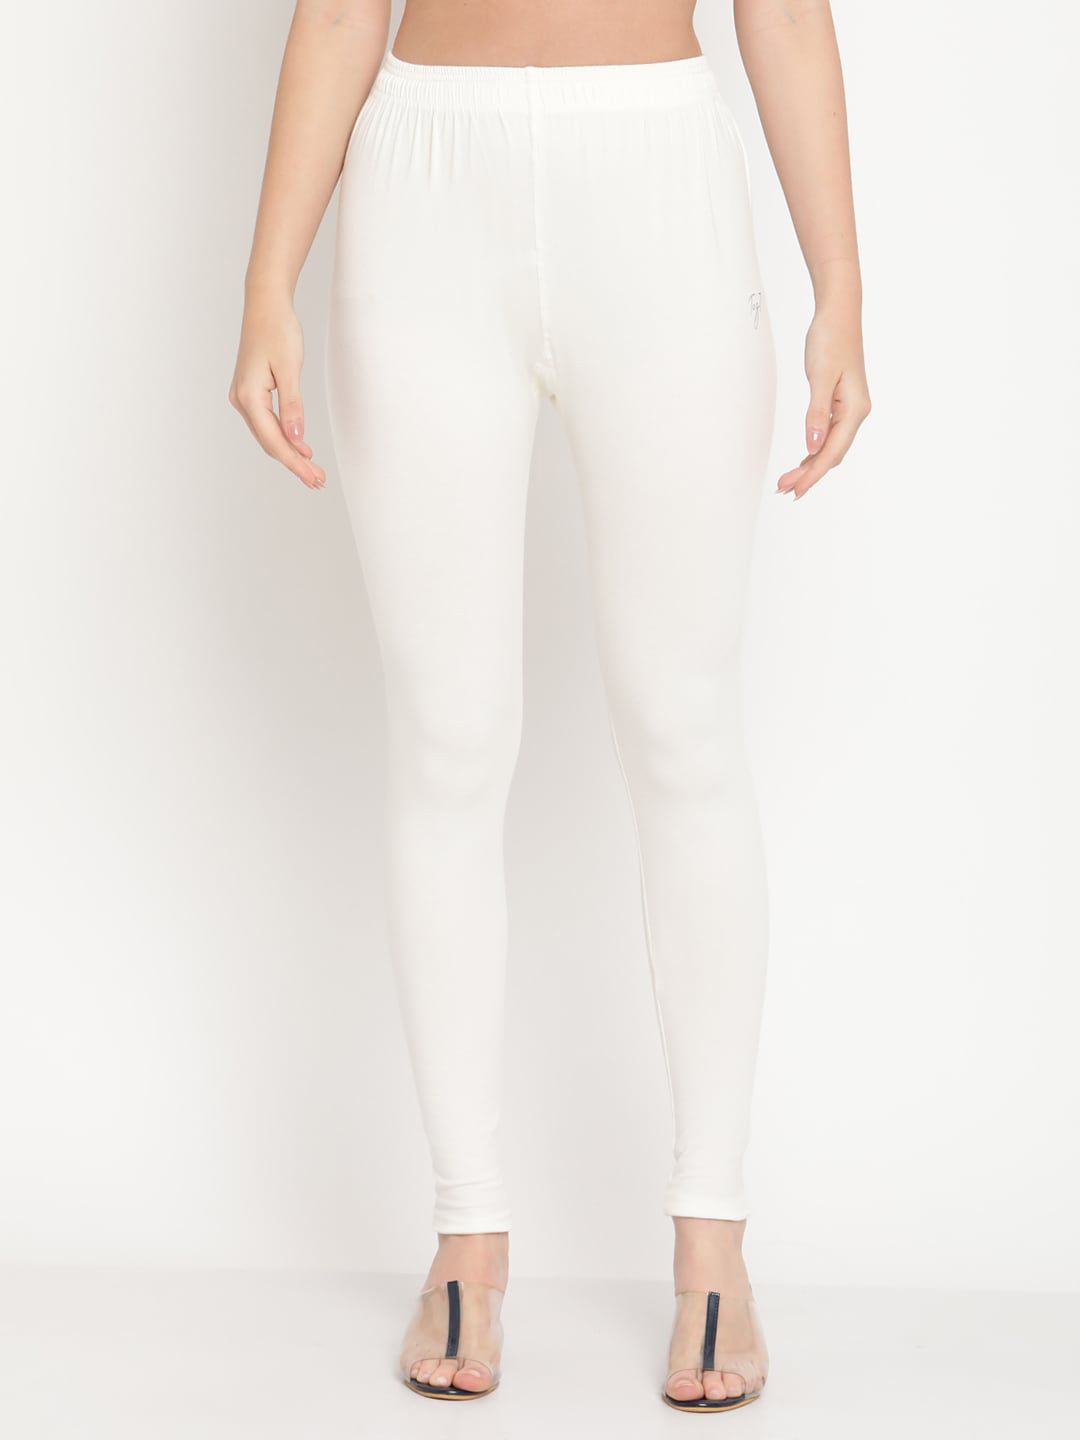 TAG 7 Women Off White Solid Comfort Fit Ankle Length Leggings Price in India